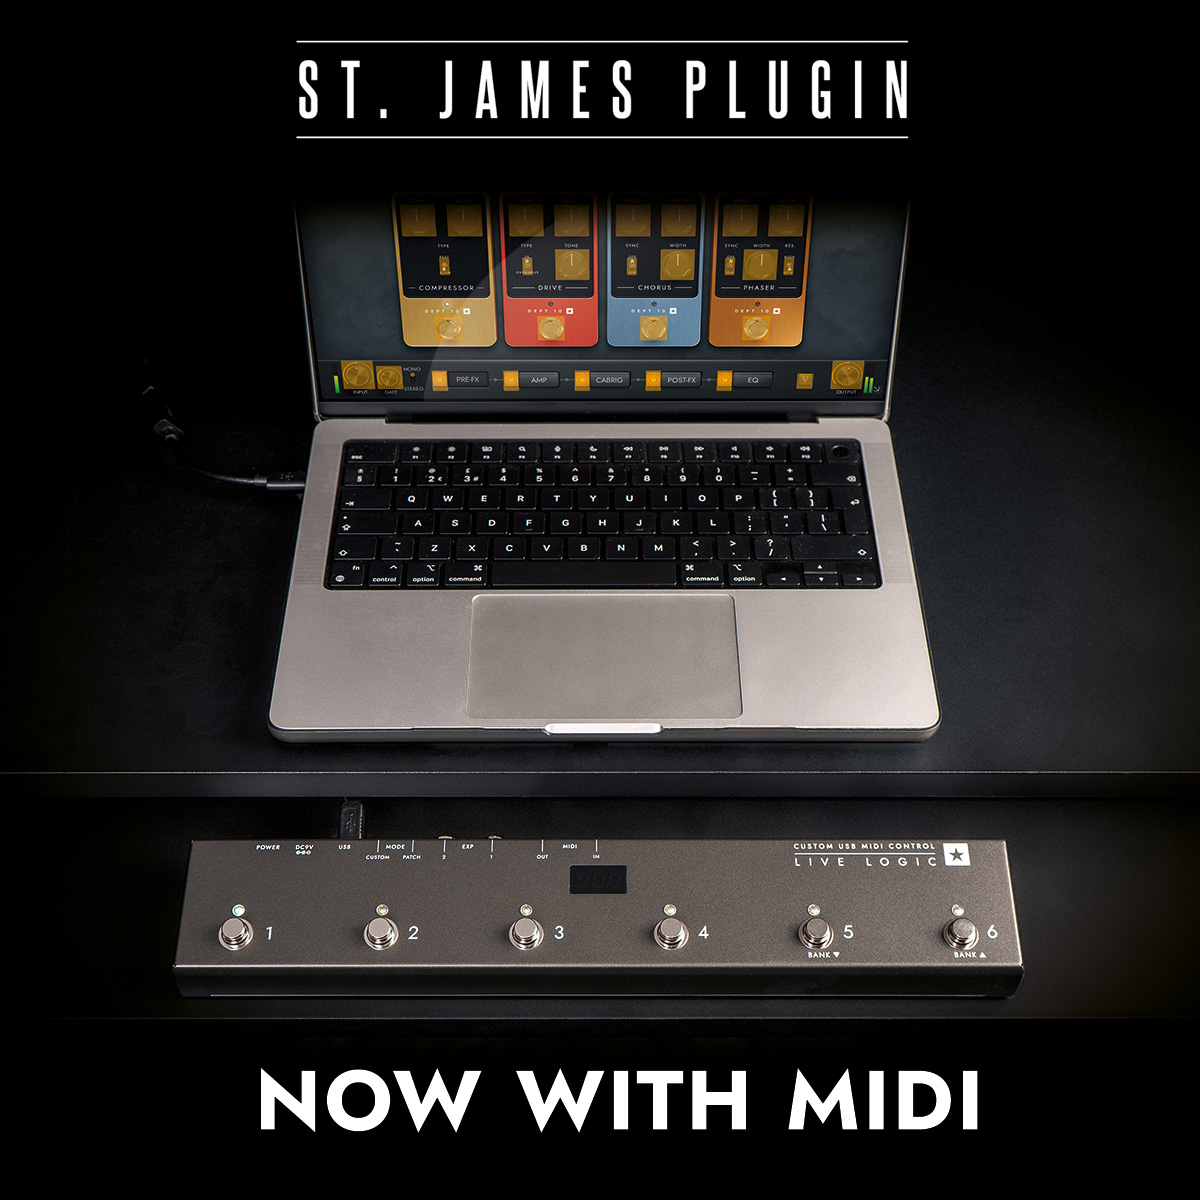 You asked, we delivered. The St. James plugin standalone versions now feature MIDI functionality in the new V1.2.0 update released today. Find the full V1.2.0 changelog at our website. Download the update here: bit.ly/3Ufol66